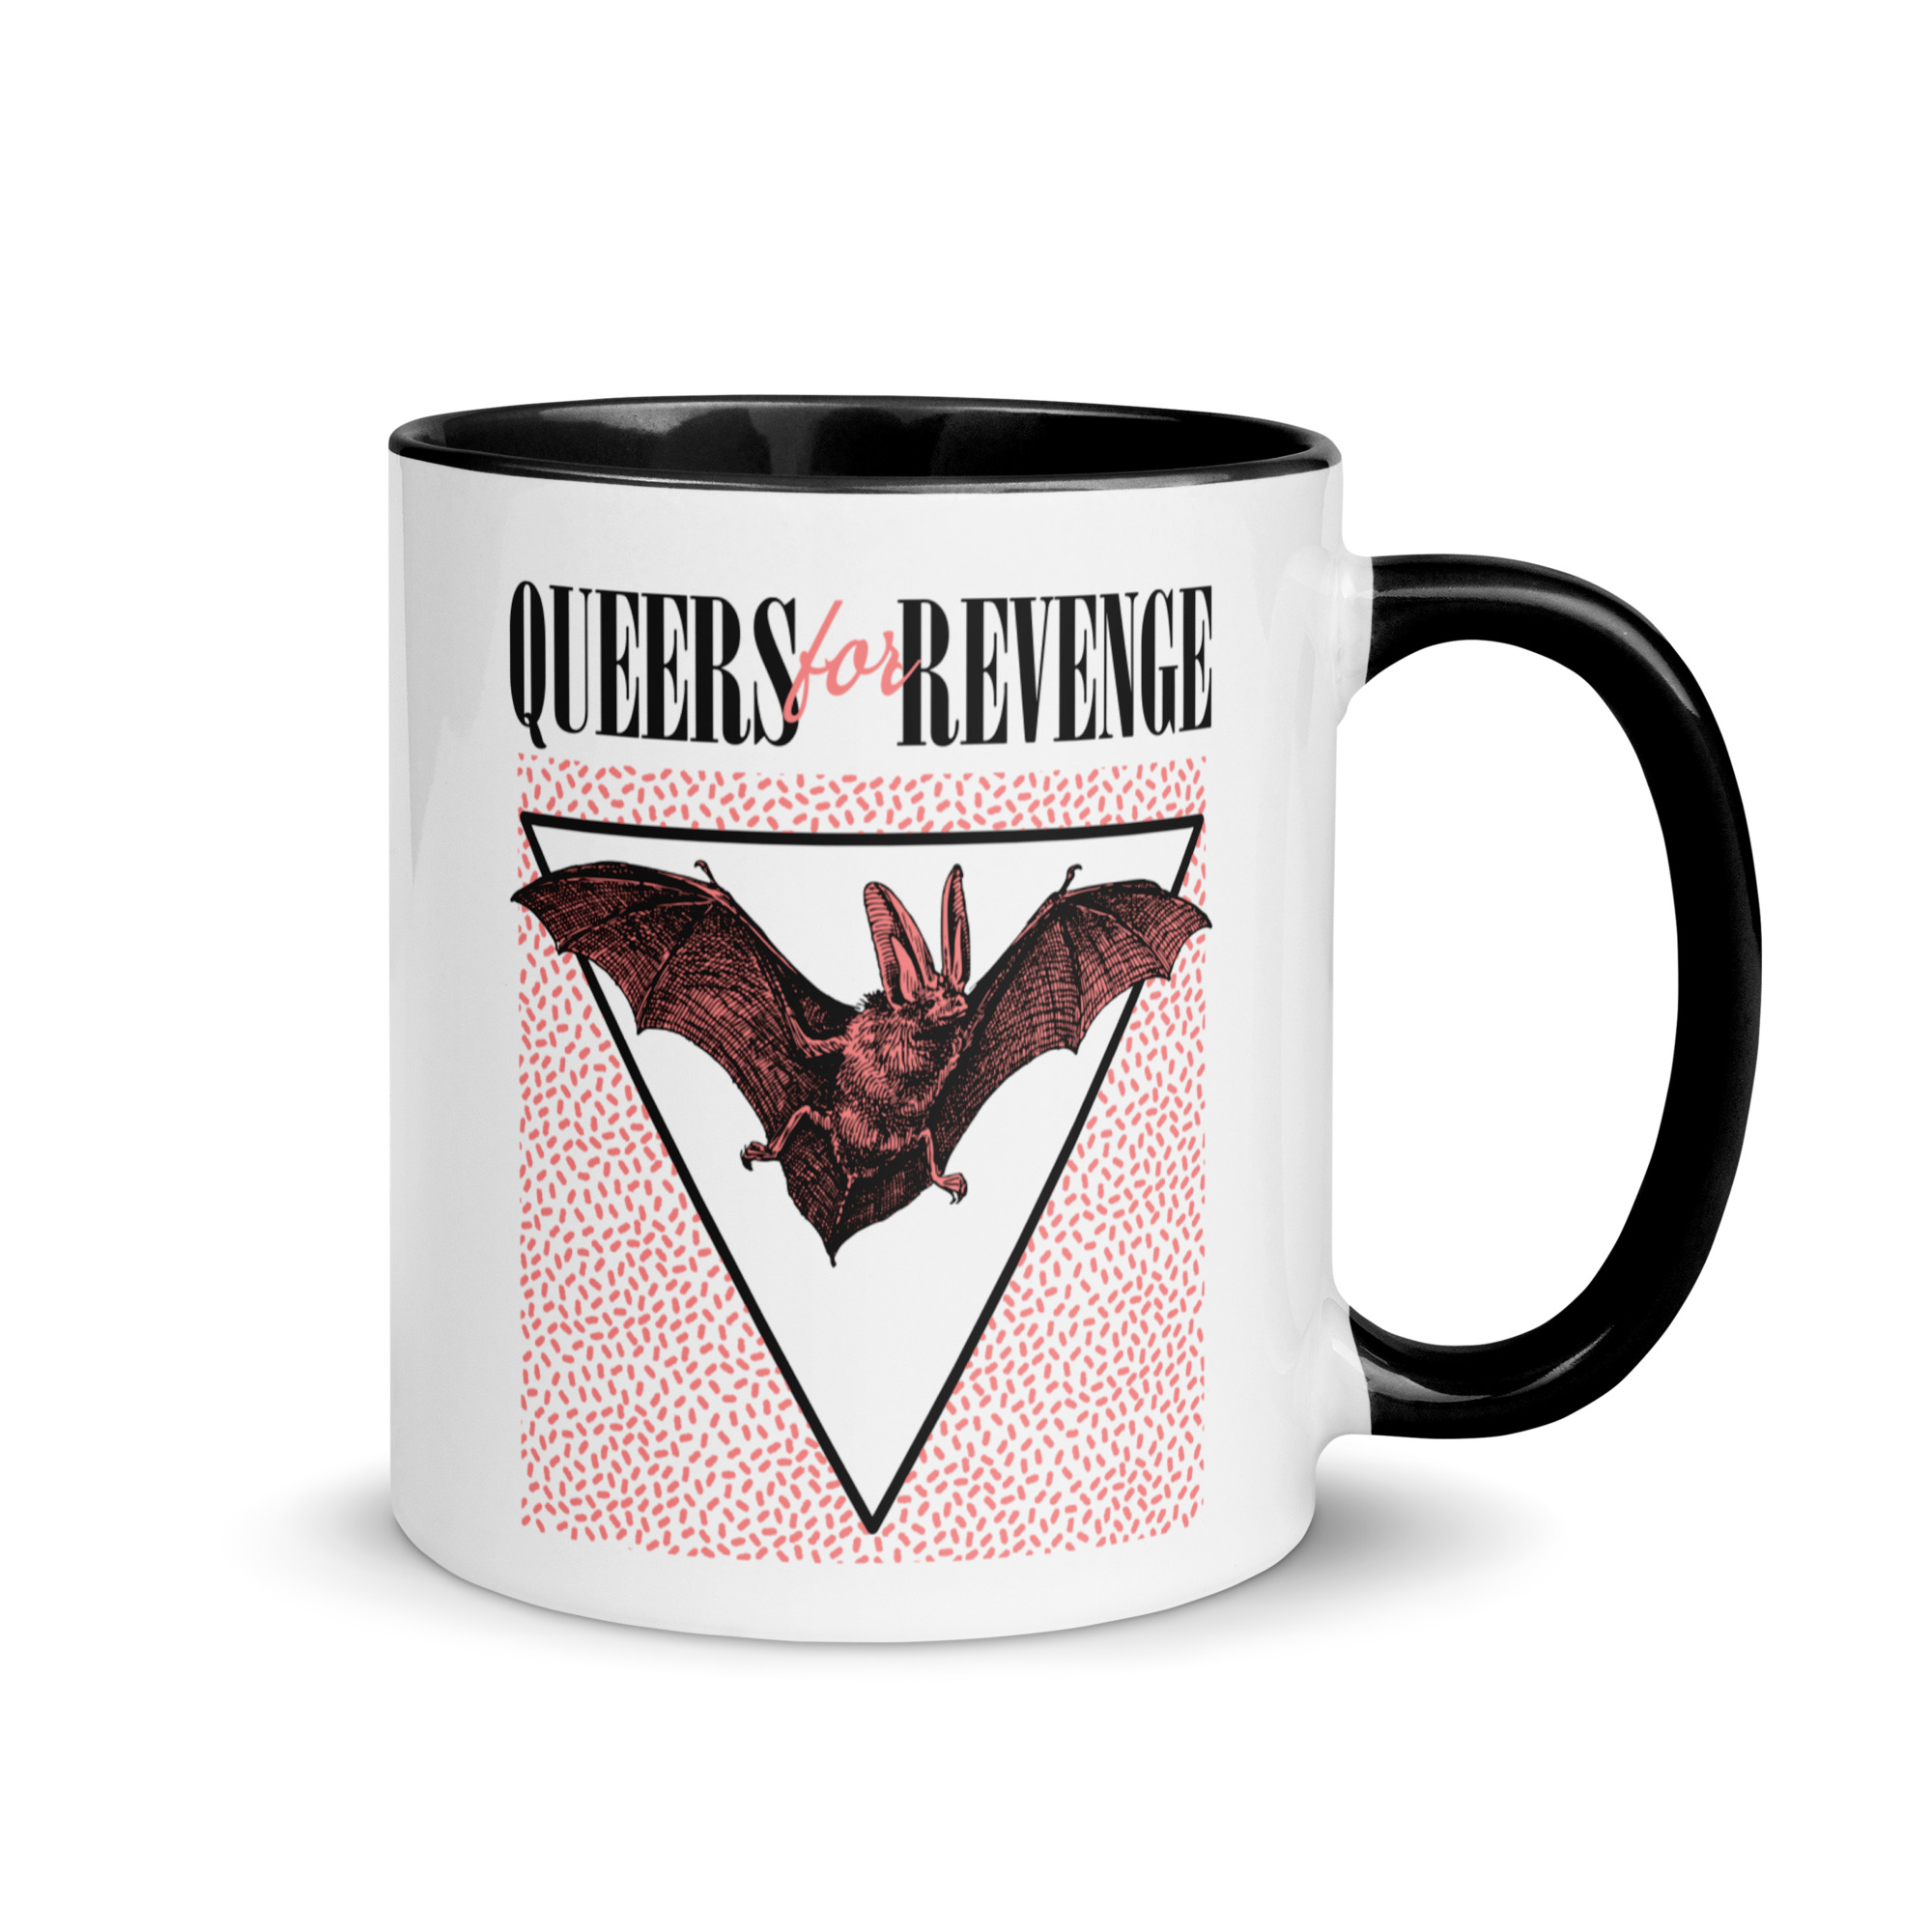 Featured image for “Queers for Revenge 80s - Mug”